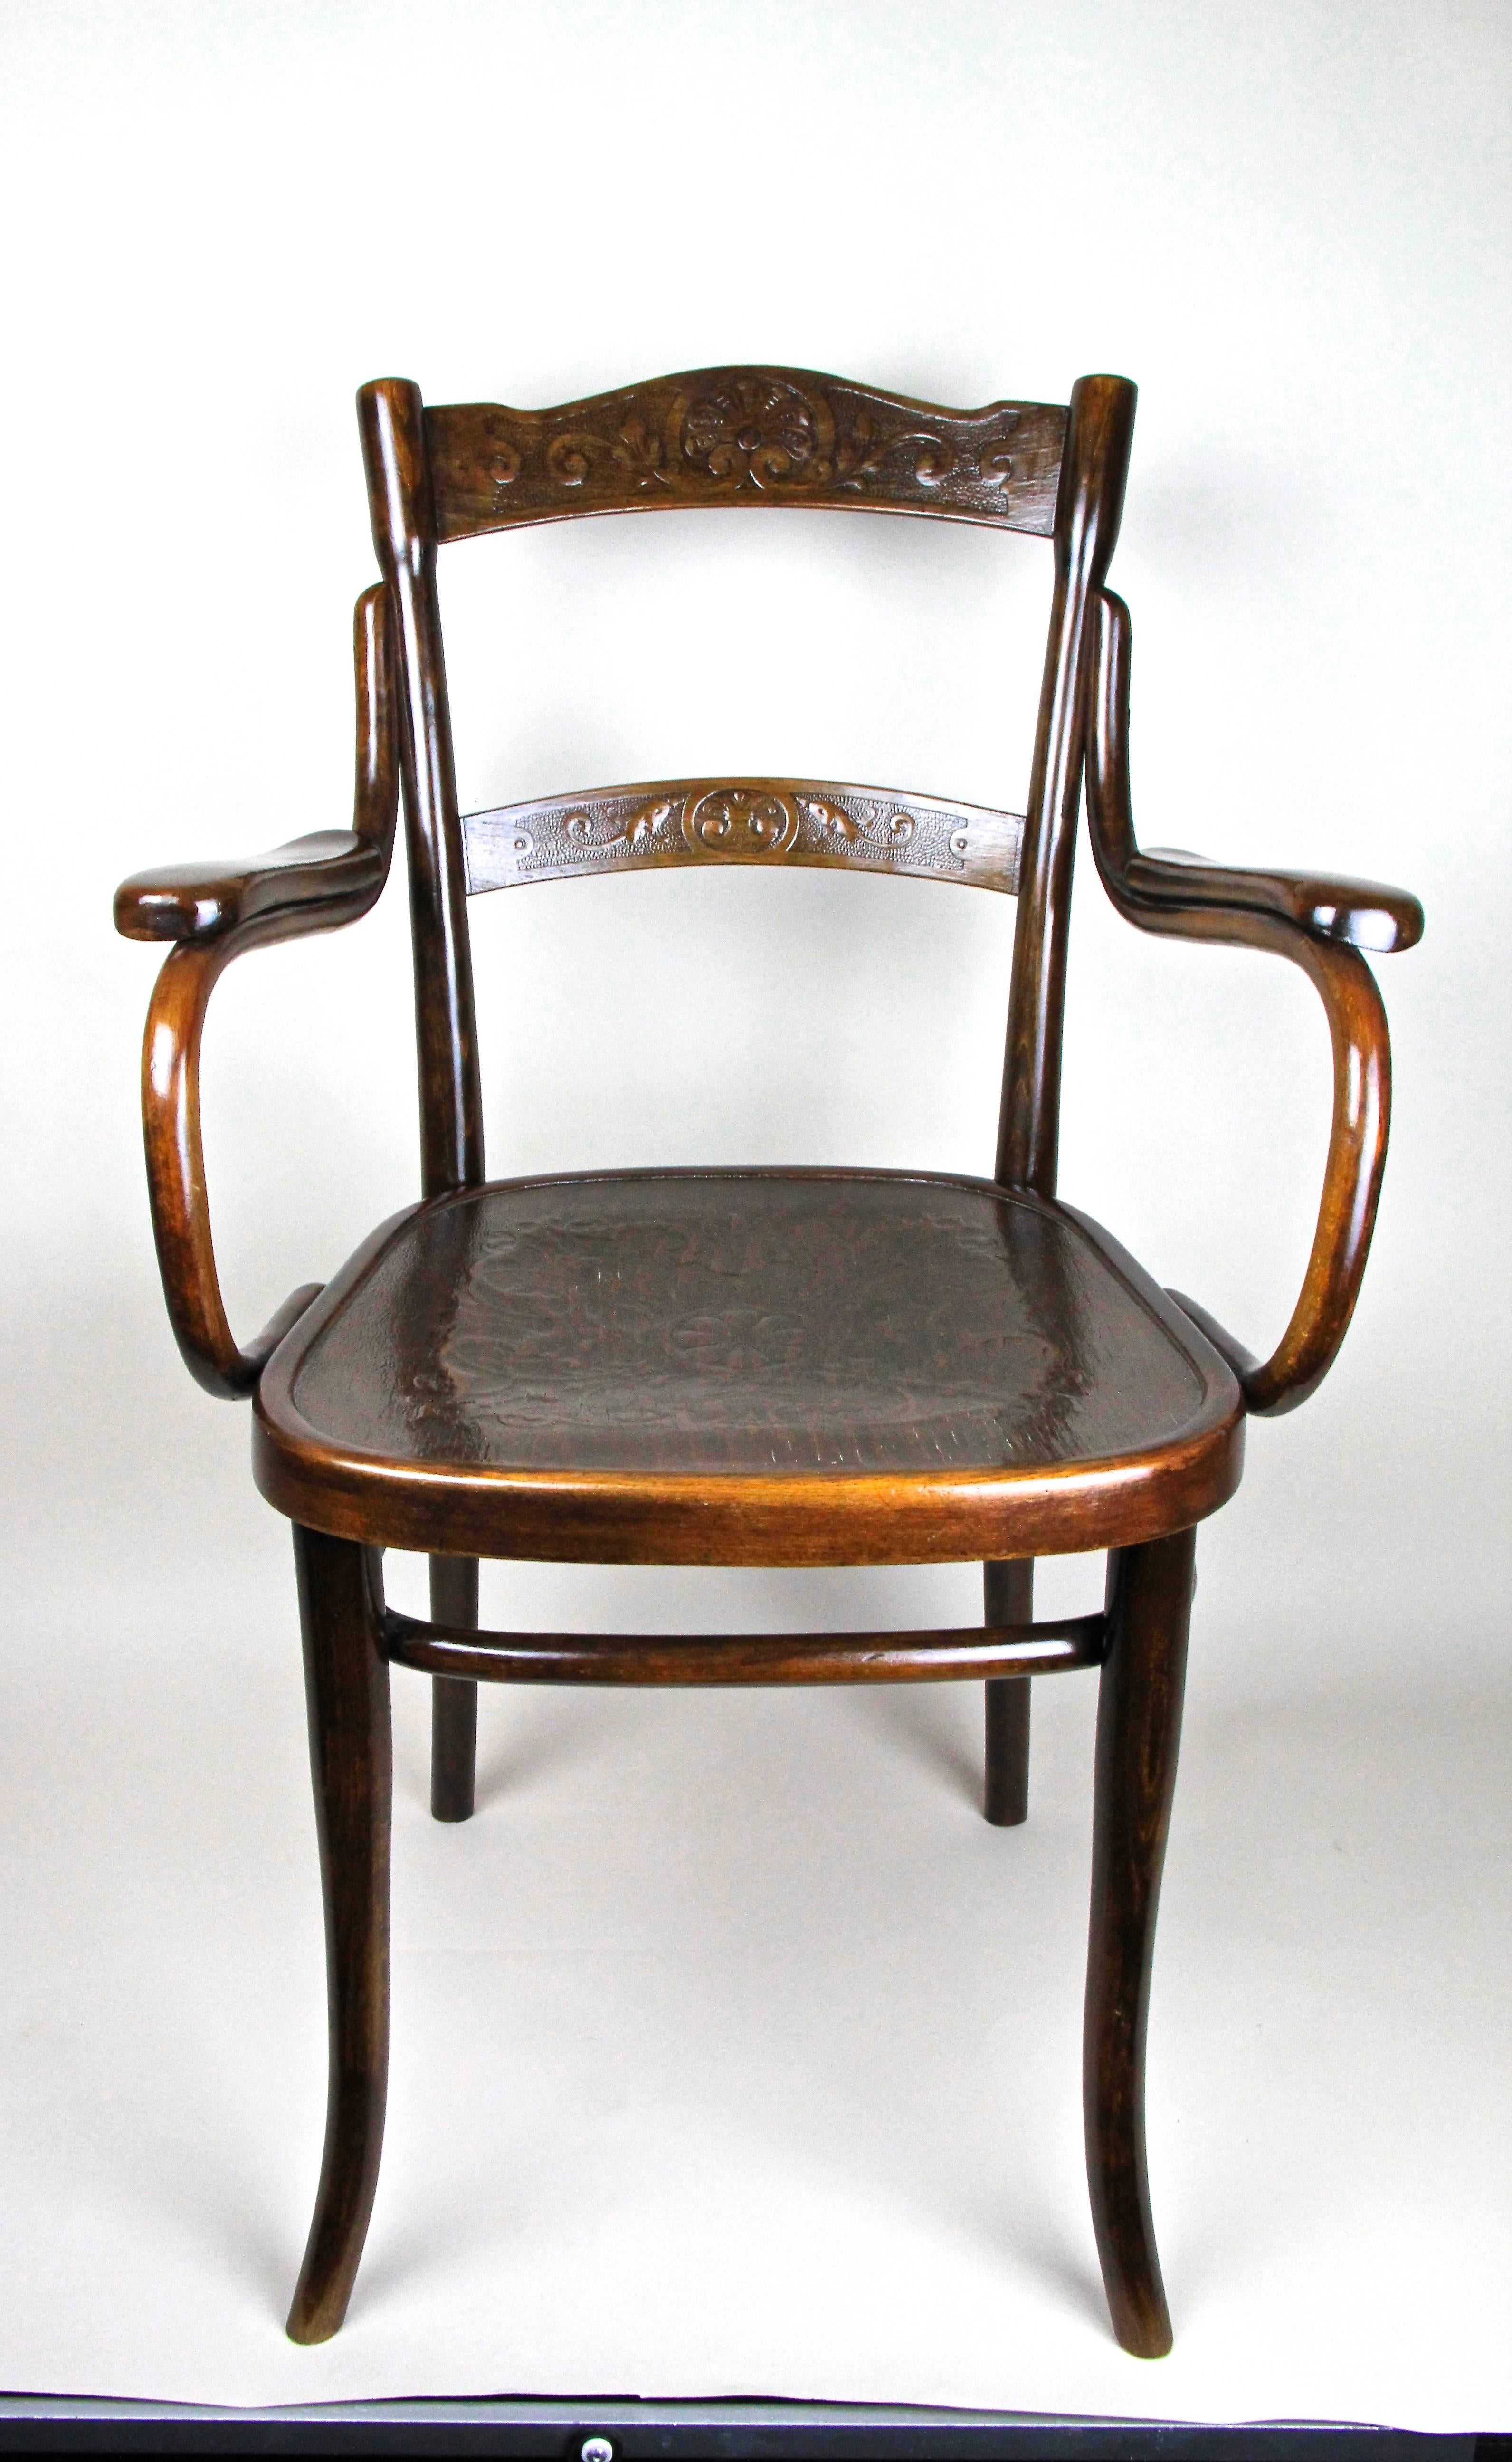 From the famous manufacture of Thonet in Vienna comes this extravagant and rare armchair, made circa 1885 out of beechwood and trimmed to nut wood.
On the backrests and the seat you will find amazing embossed ornamental designs, truly a fantastic